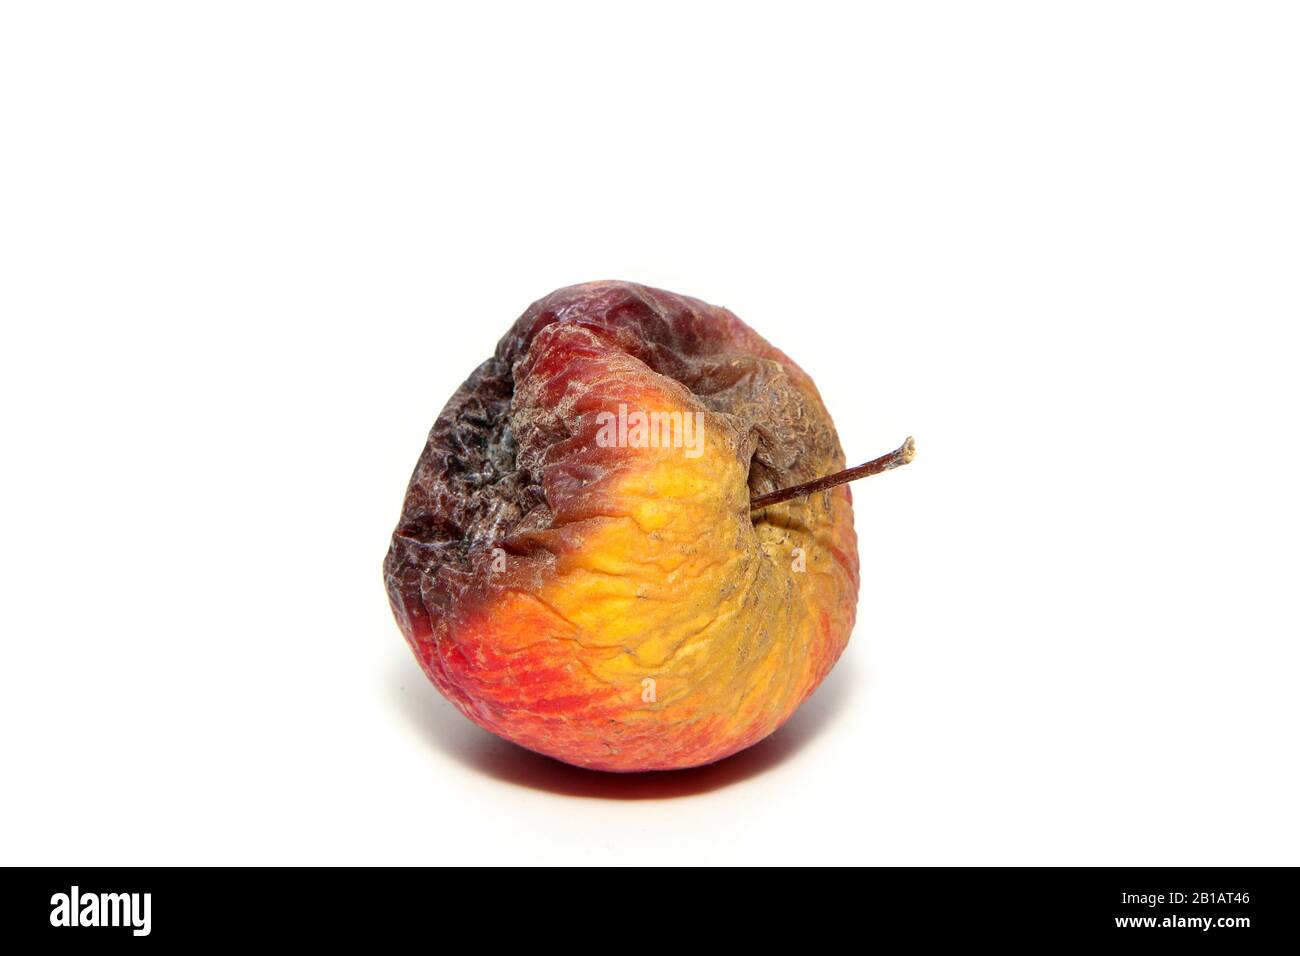 One rotten and uneatable apple. Isolated on a white background. Stock Photo